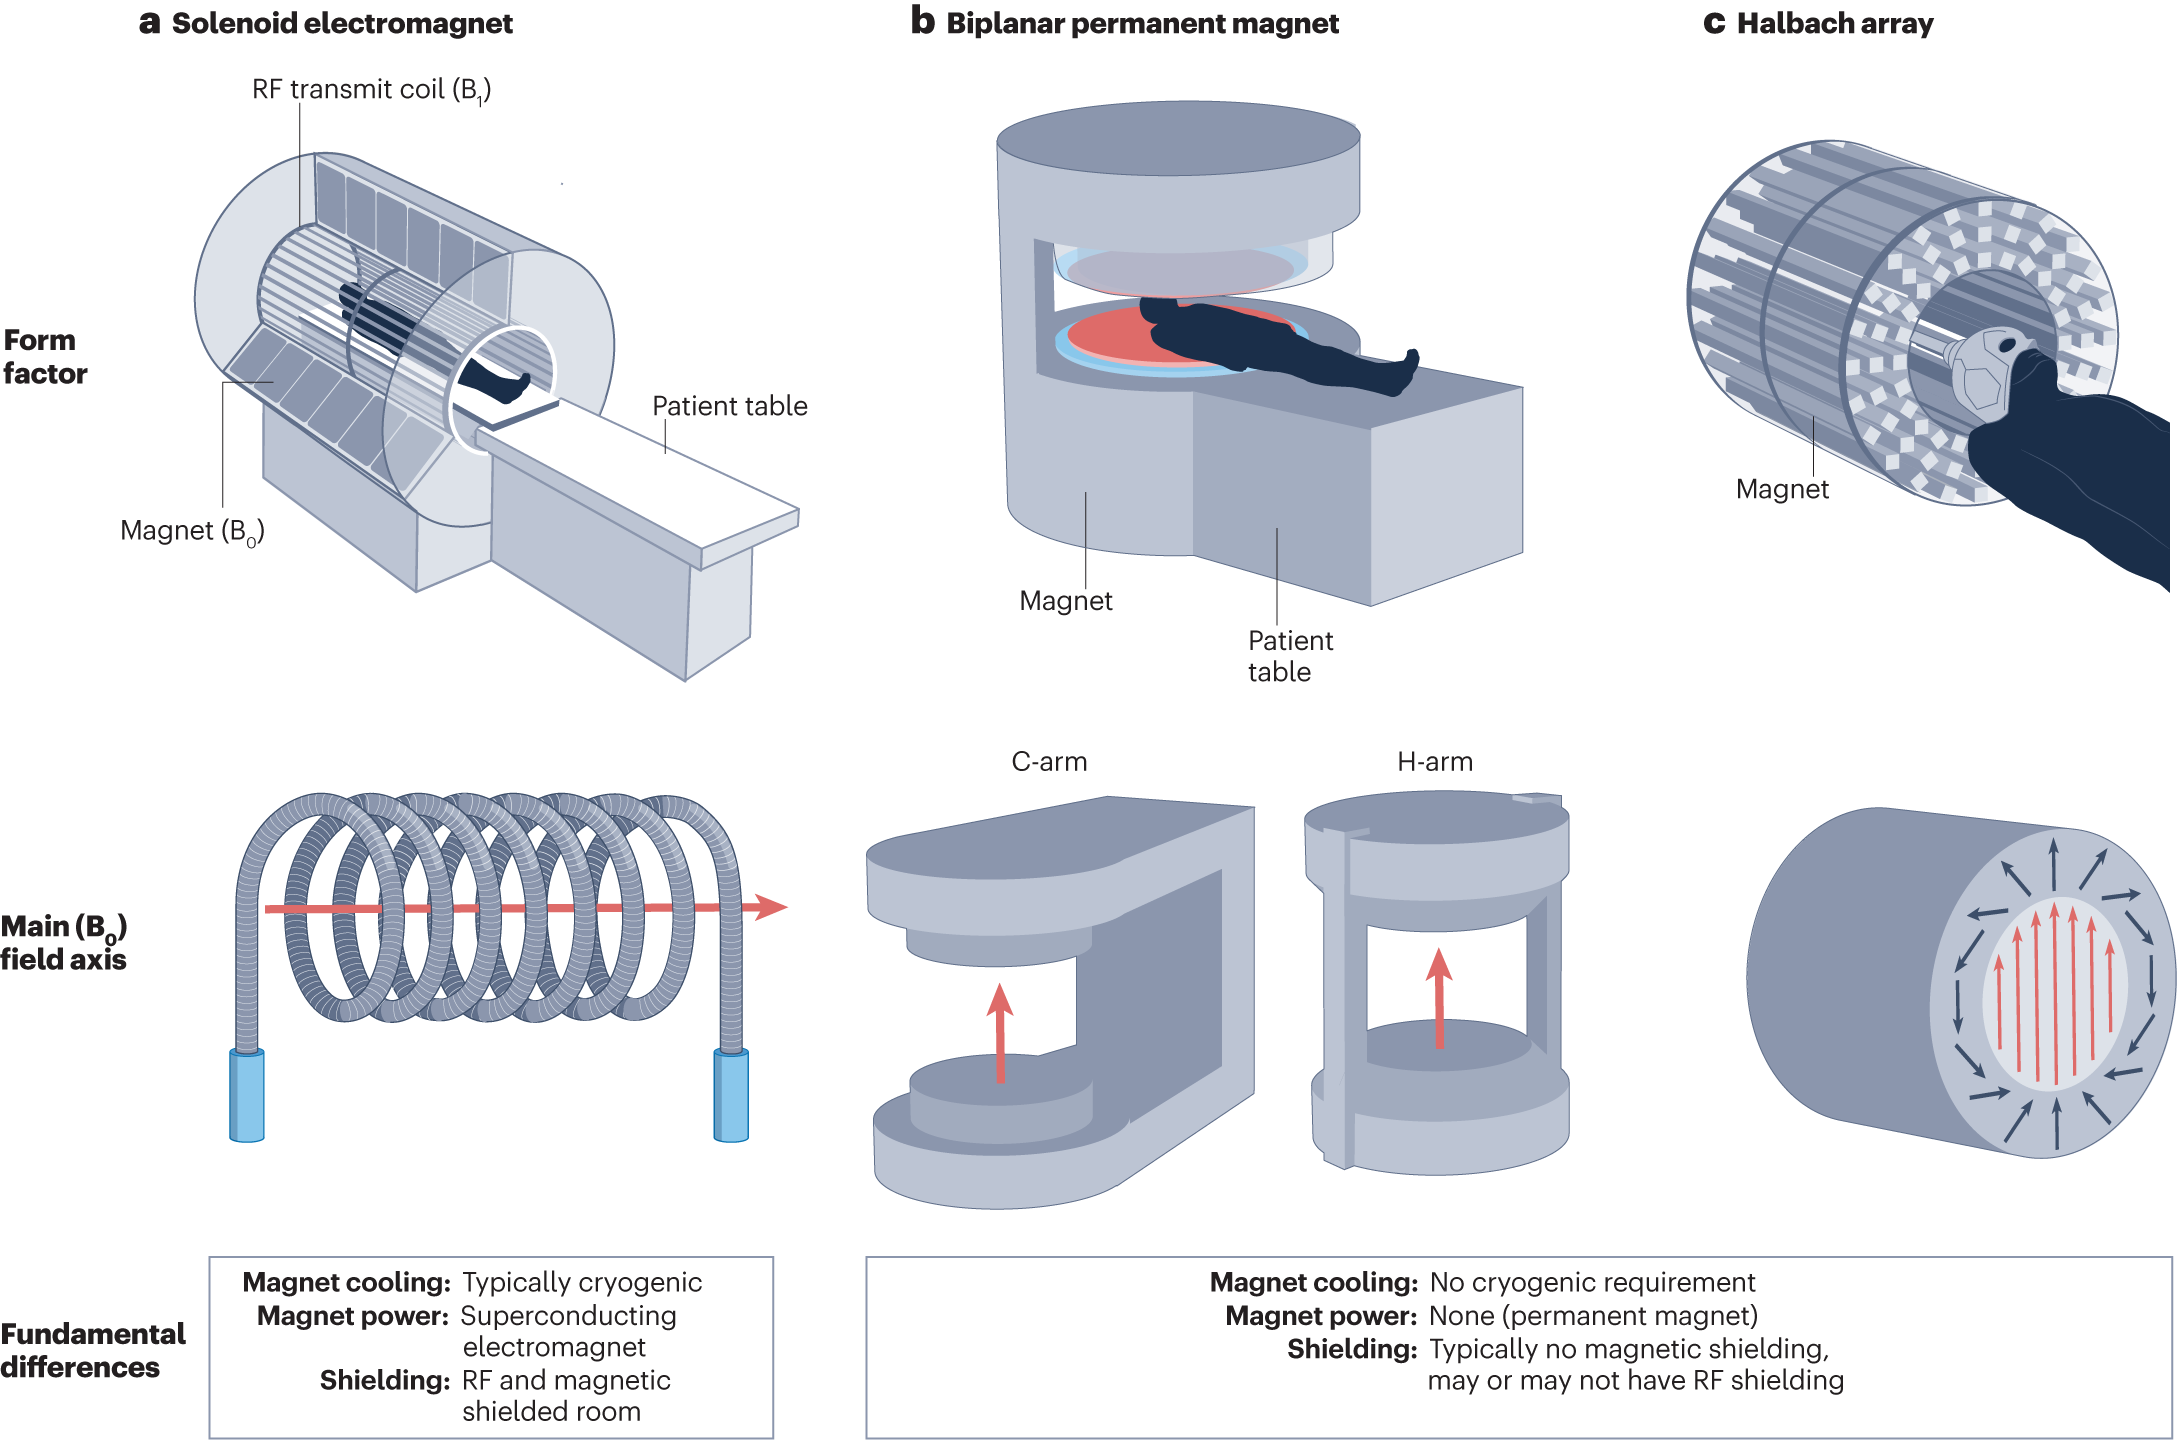 Superconductive magnet design - Questions and Answers ​in MRI